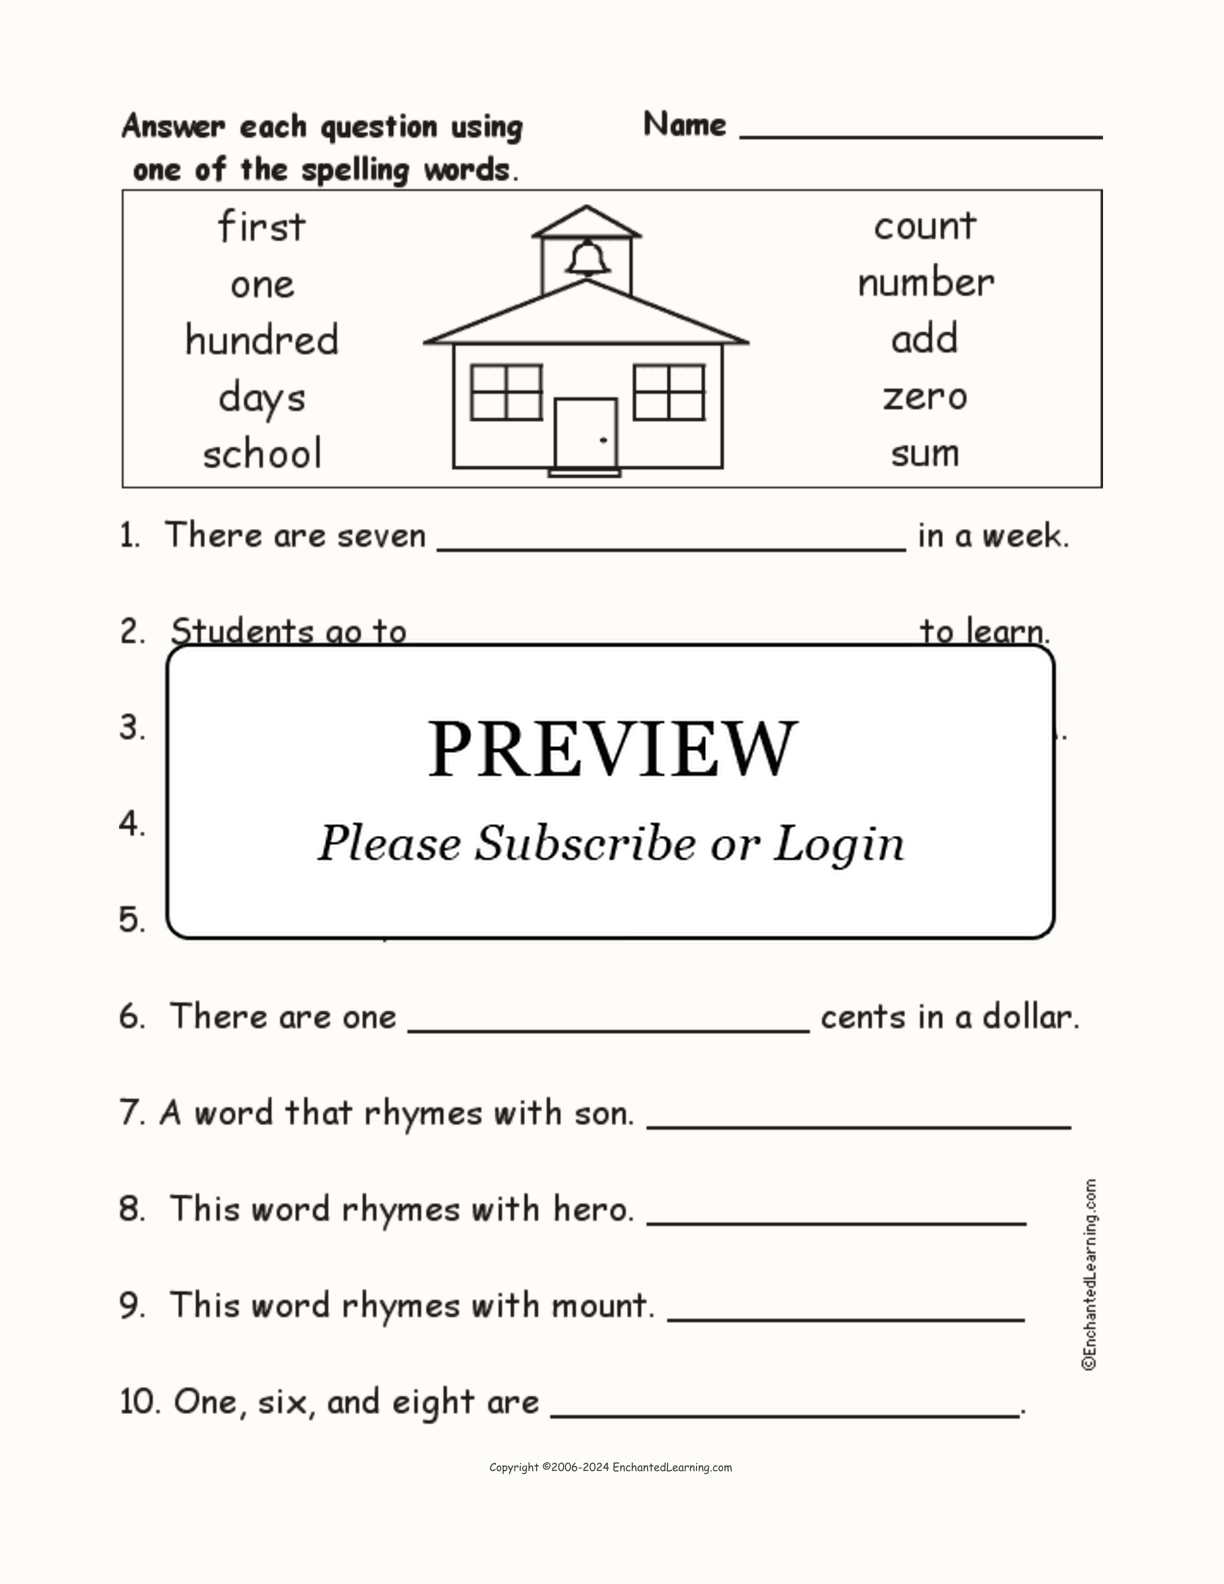 100th Day of School: Spelling Word Questions interactive worksheet page 1